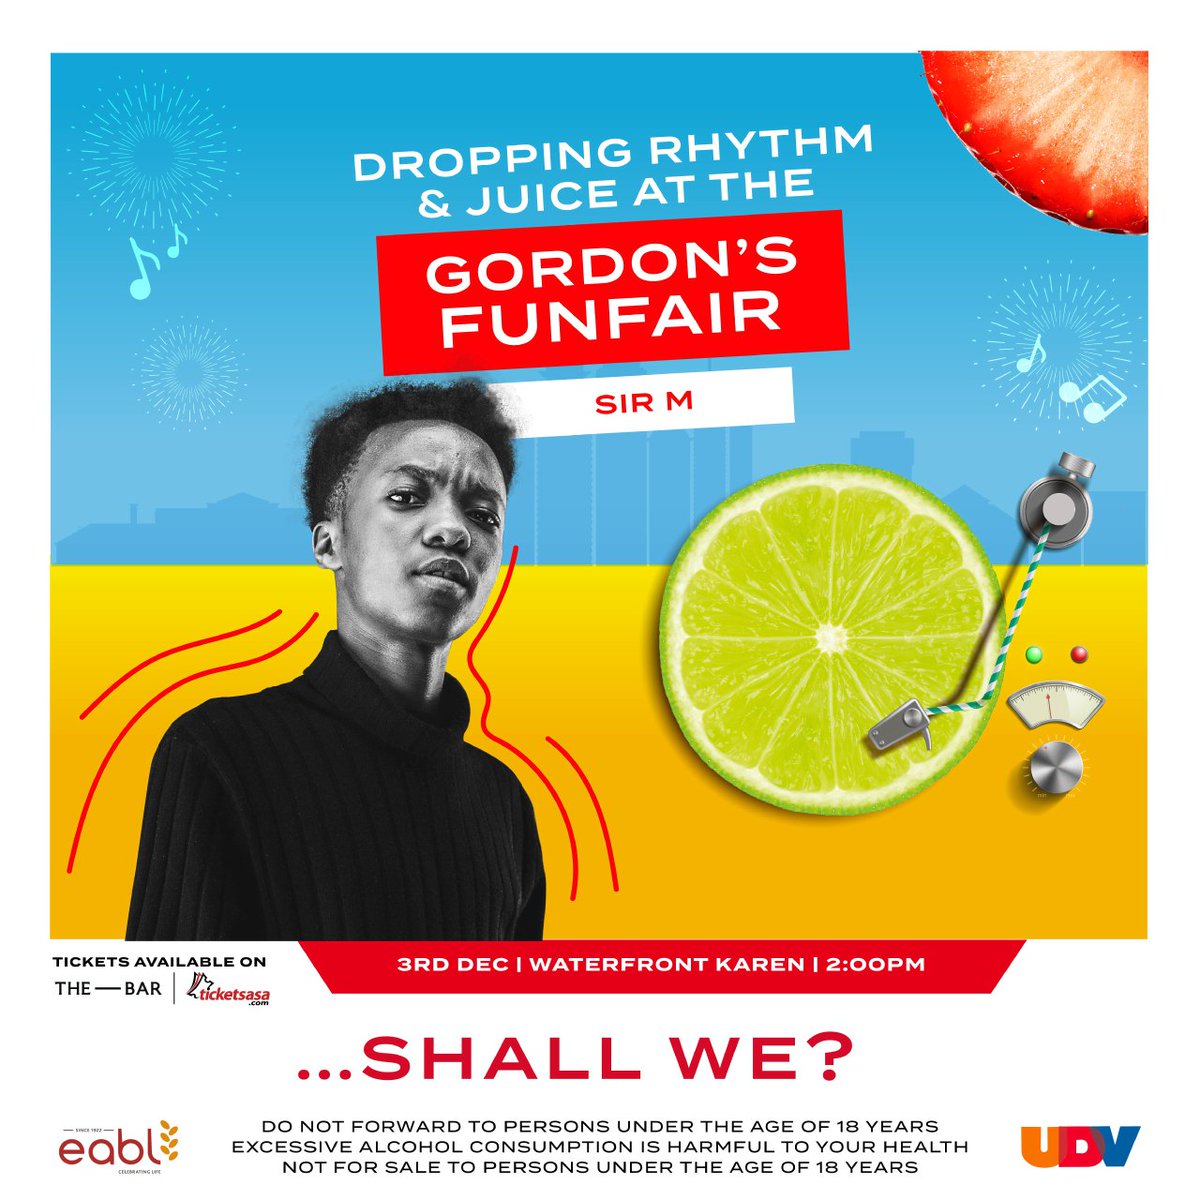 I'm absolutely GASSED to be performing this Saturday at the Karen Waterfront for the Gordon's Fun Fair 🔥 this will be lively for sure. 

View the poster to learn how you can purchase your tickets. See you all! 

#ShallWe #WhatsYourFlavor